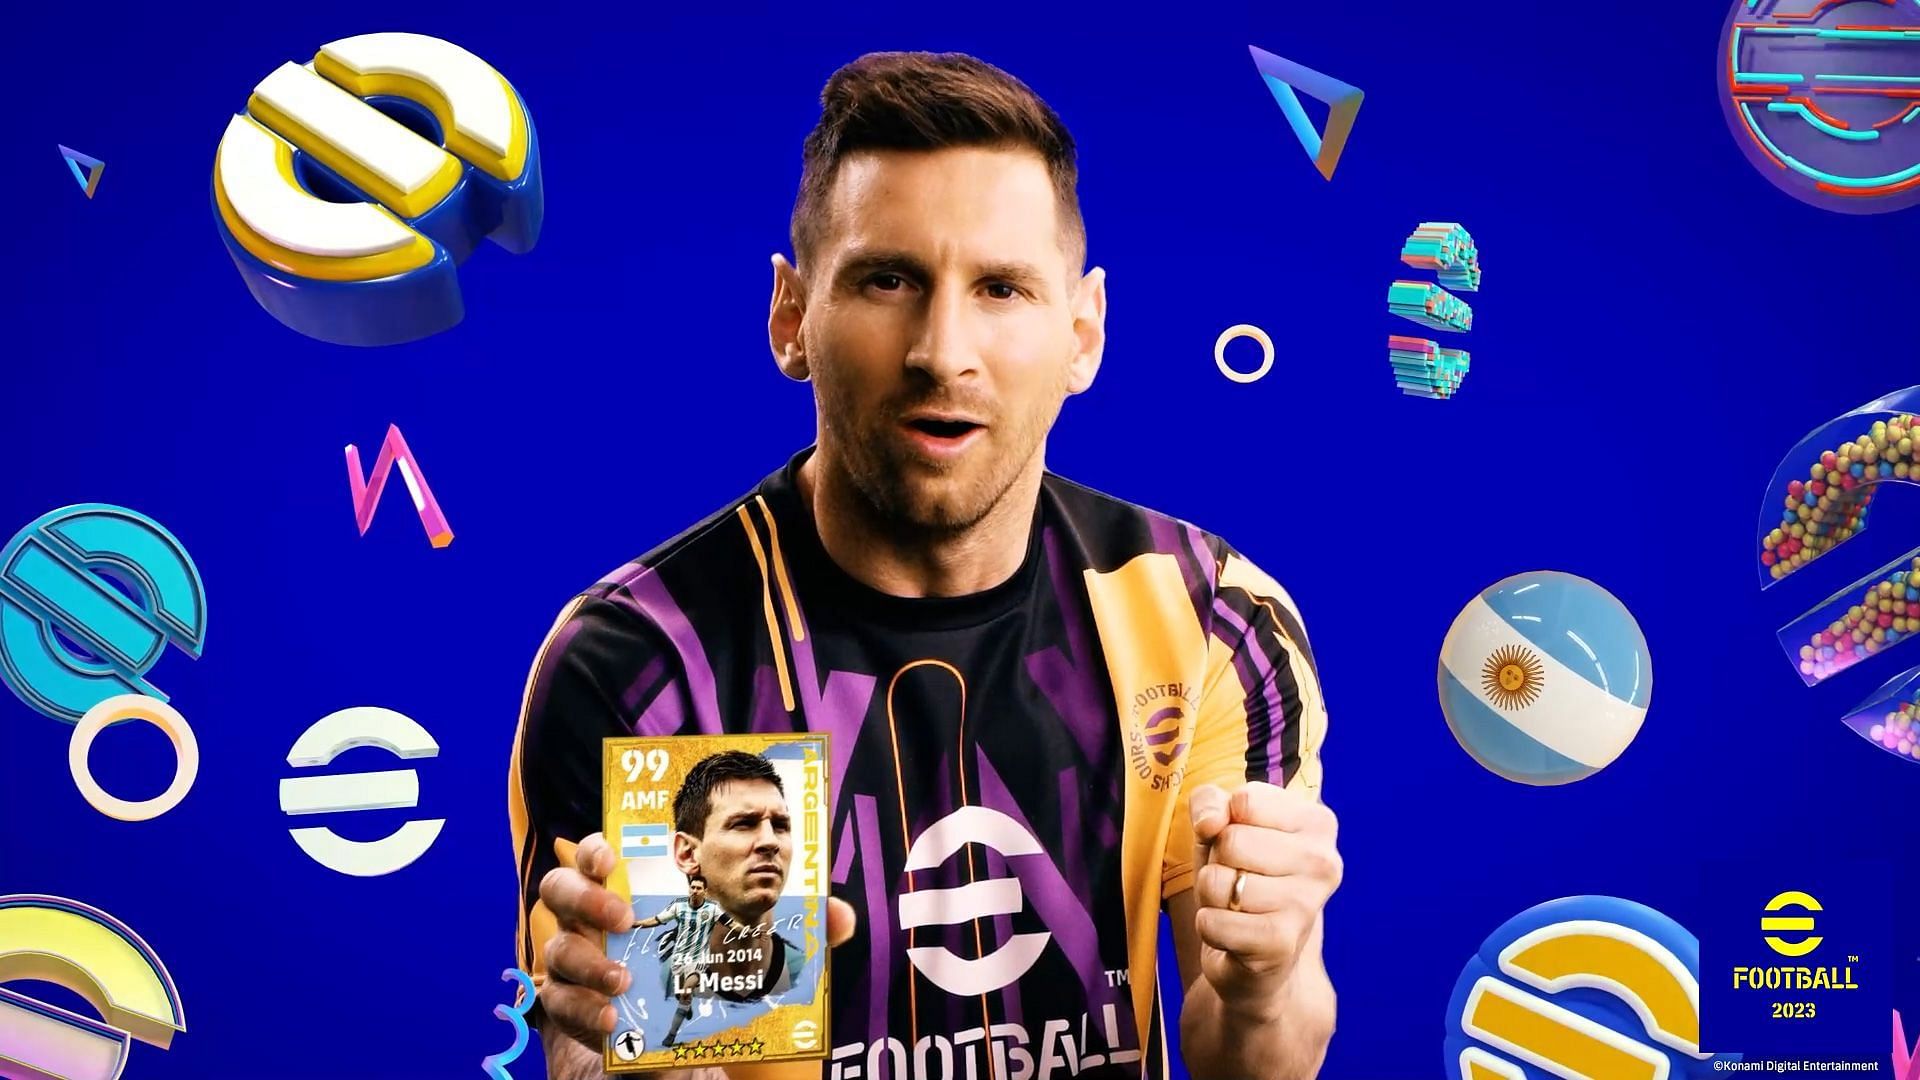 eFootball™ 2023 v2.2.0 Patch Notes